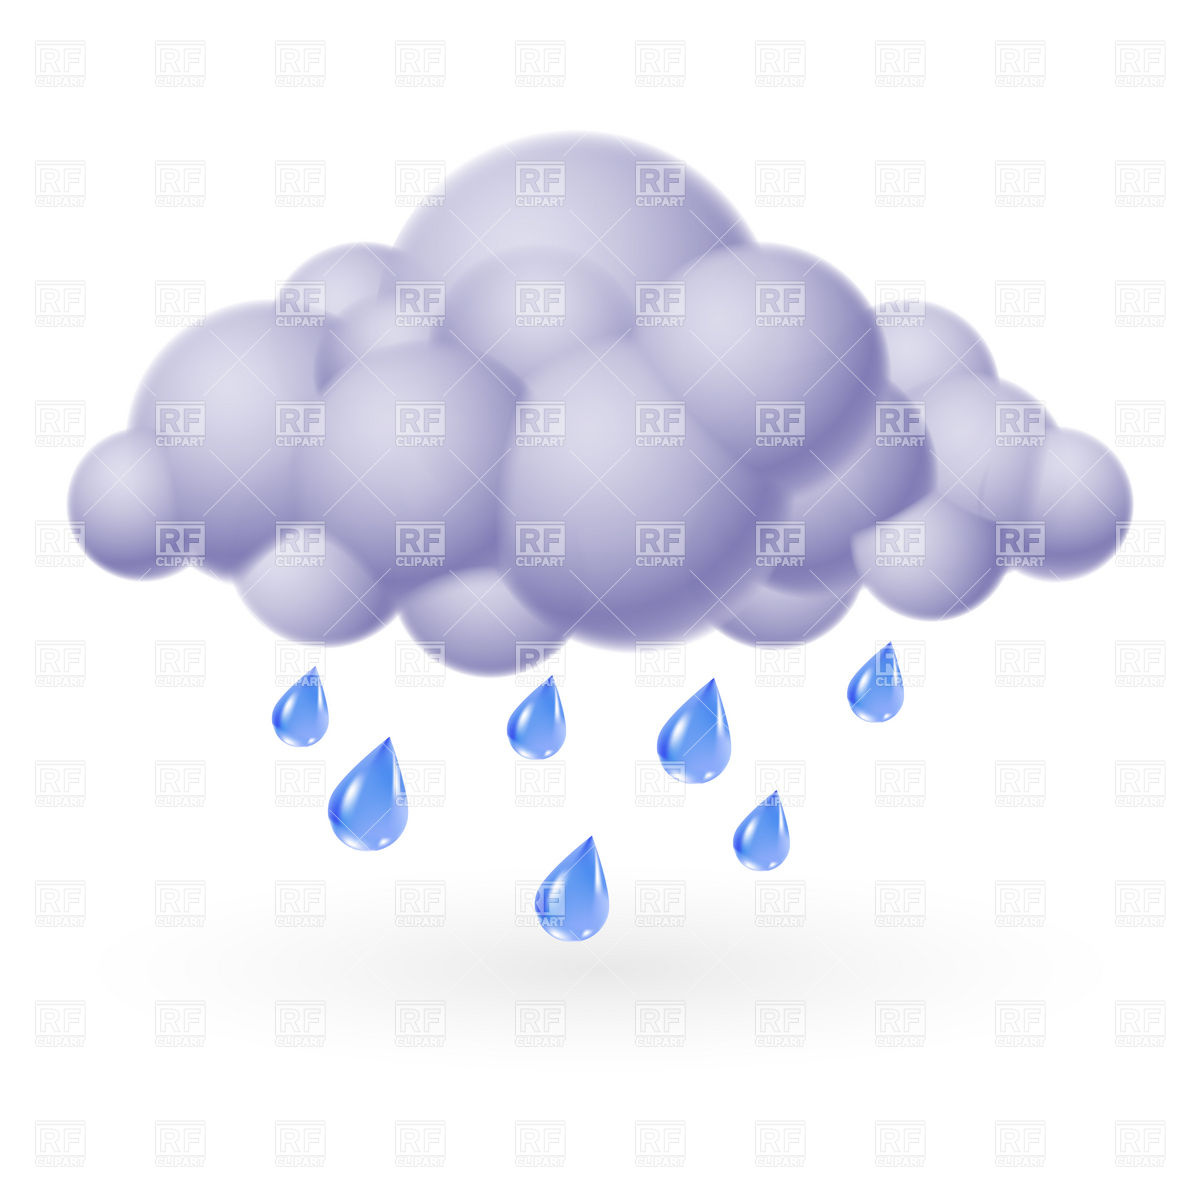 Rainy Cloud   Weather Icon Download Royalty Free Vector Clipart  Eps